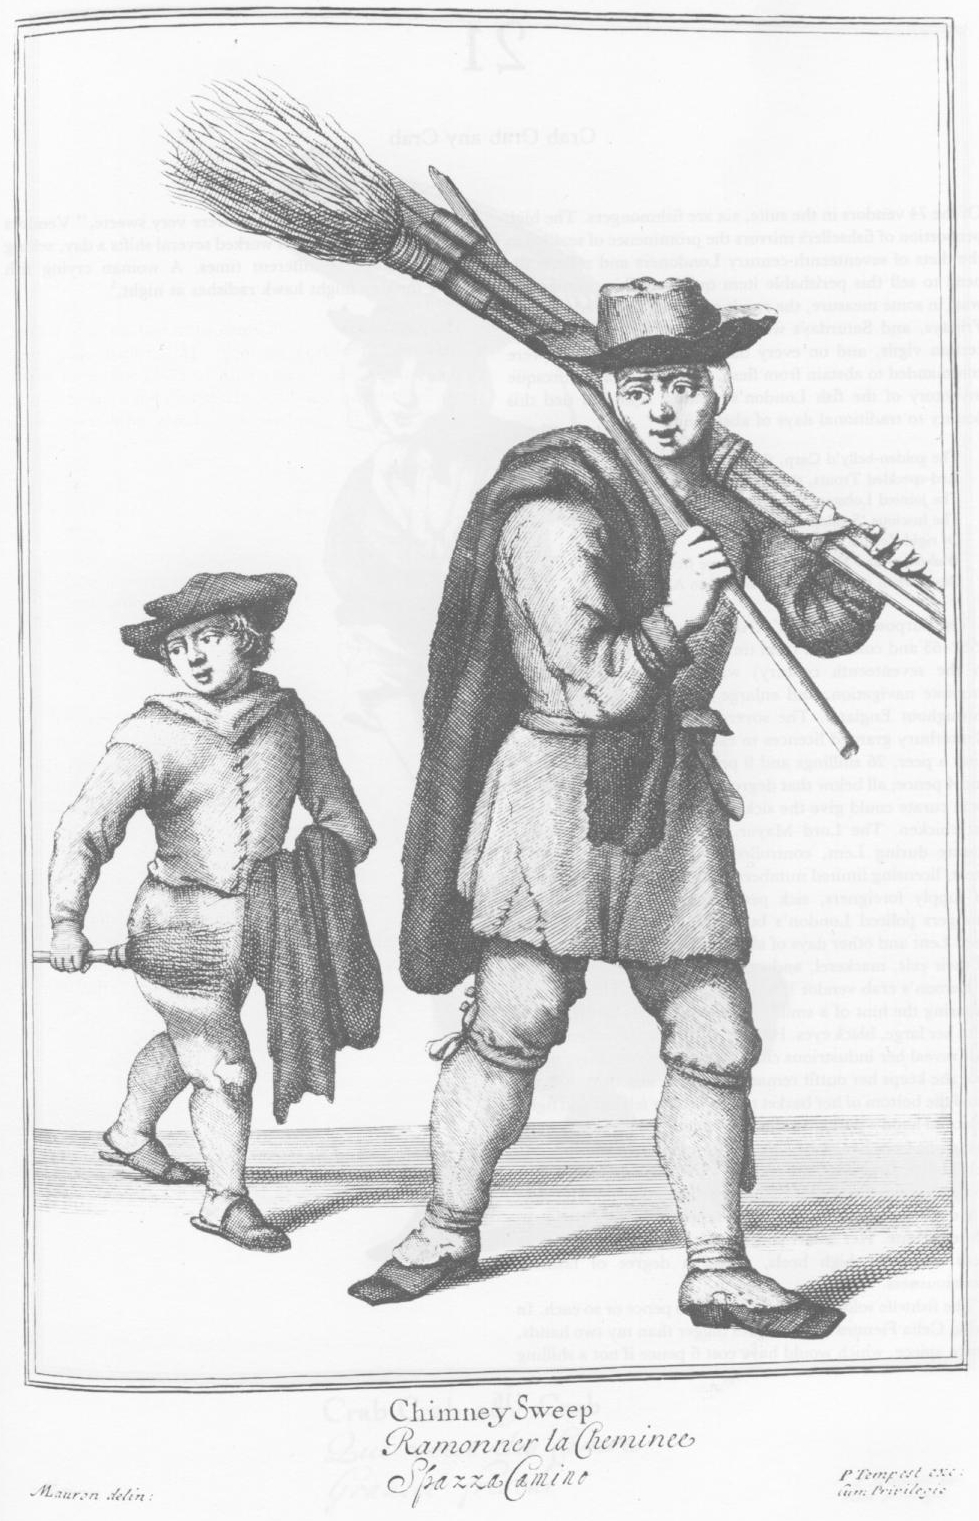 A man with a set of brooms on one shoulder walks across the scene, followed by a young boy apprentice, with a sack over one arm, and a broom in his hand